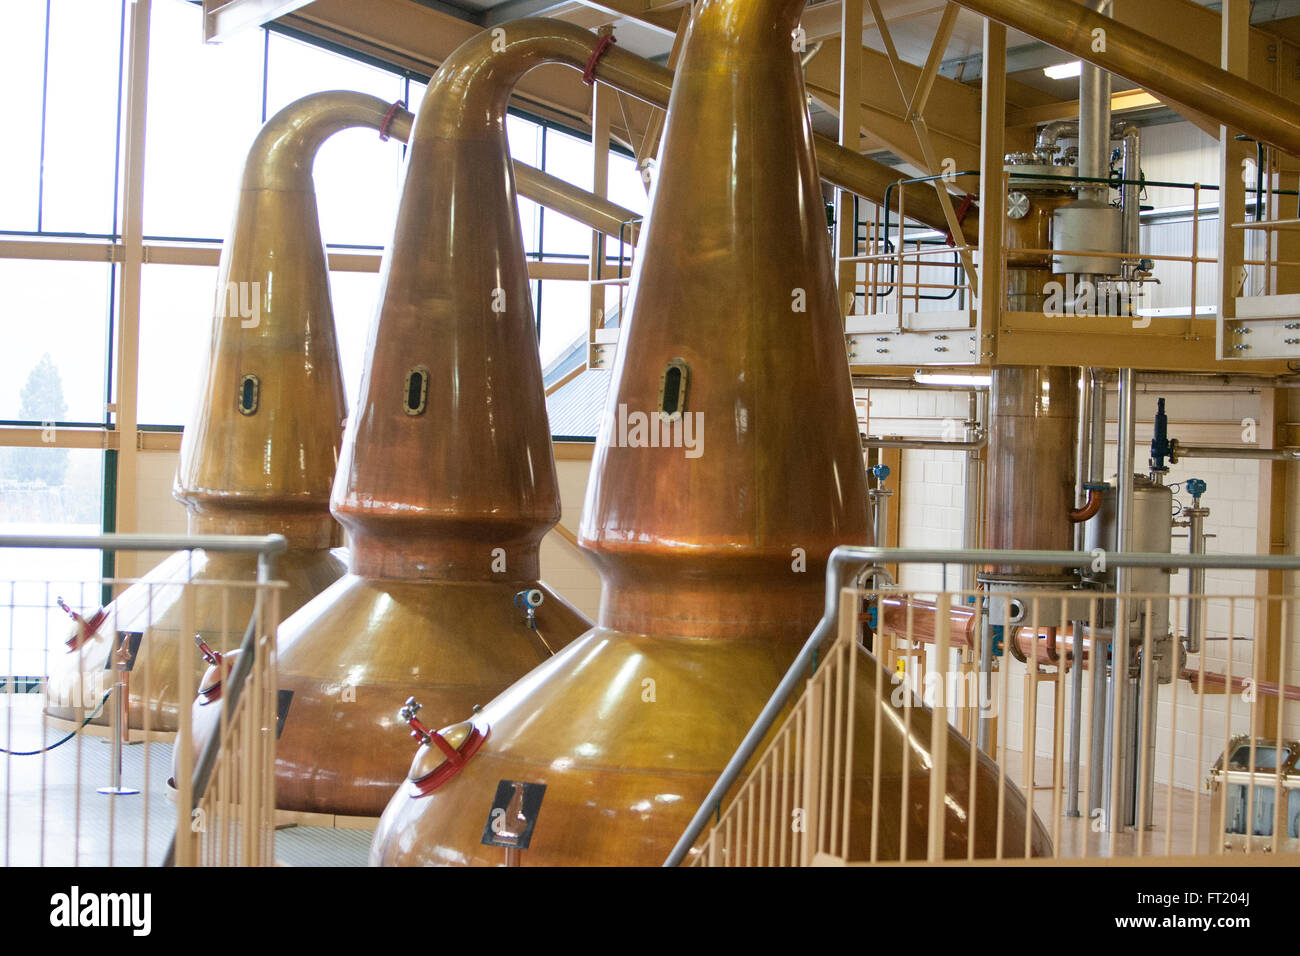 The unique lantern type stills made of copper at The Glenlivet Distillery in Speyside of Scotland give a nice taste to scotch Stock Photo